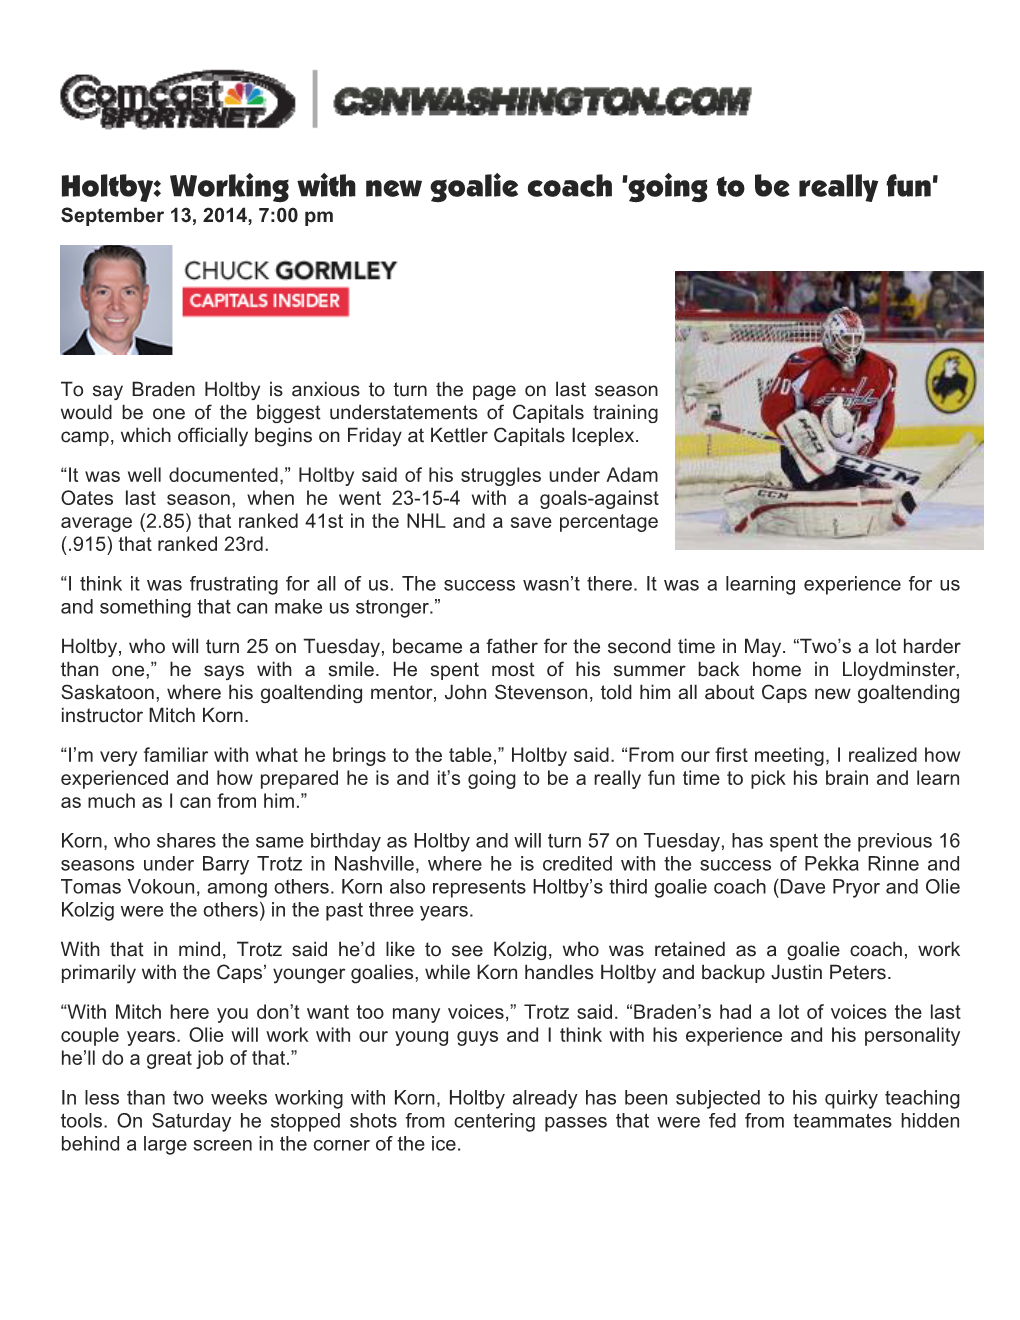 Holtby: Working with New Goalie Coach 'Going to Be Really Fun' September 13, 2014, 7:00 Pm